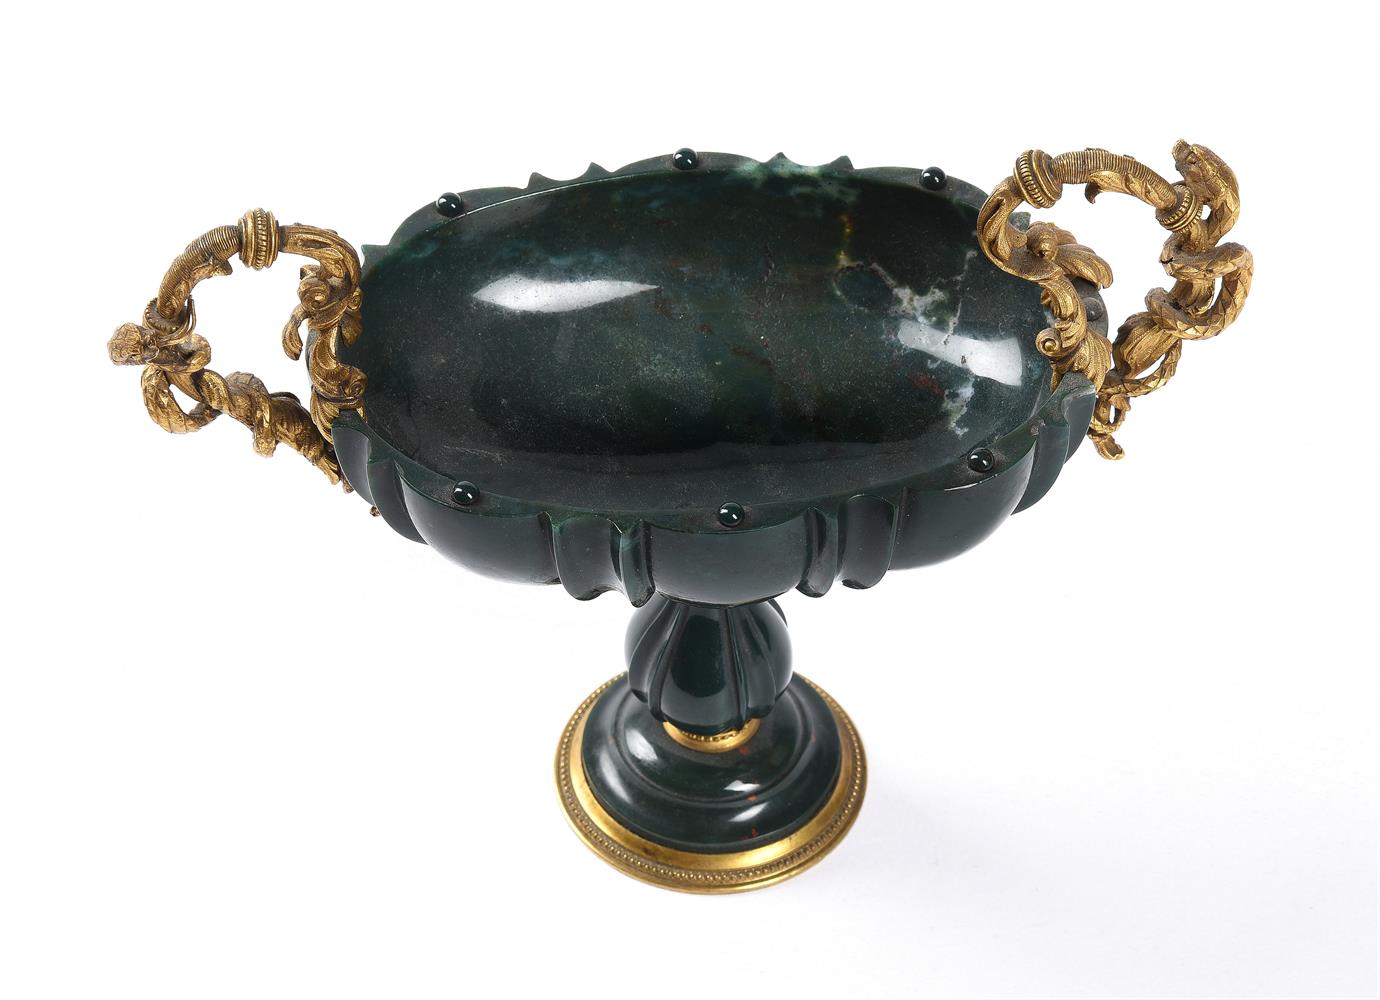 A BLOODSTONE TAZZA WITH ORMOLU MOUNTS, ITALIAN OR FRENCH, 19TH CENTURY - Image 2 of 3